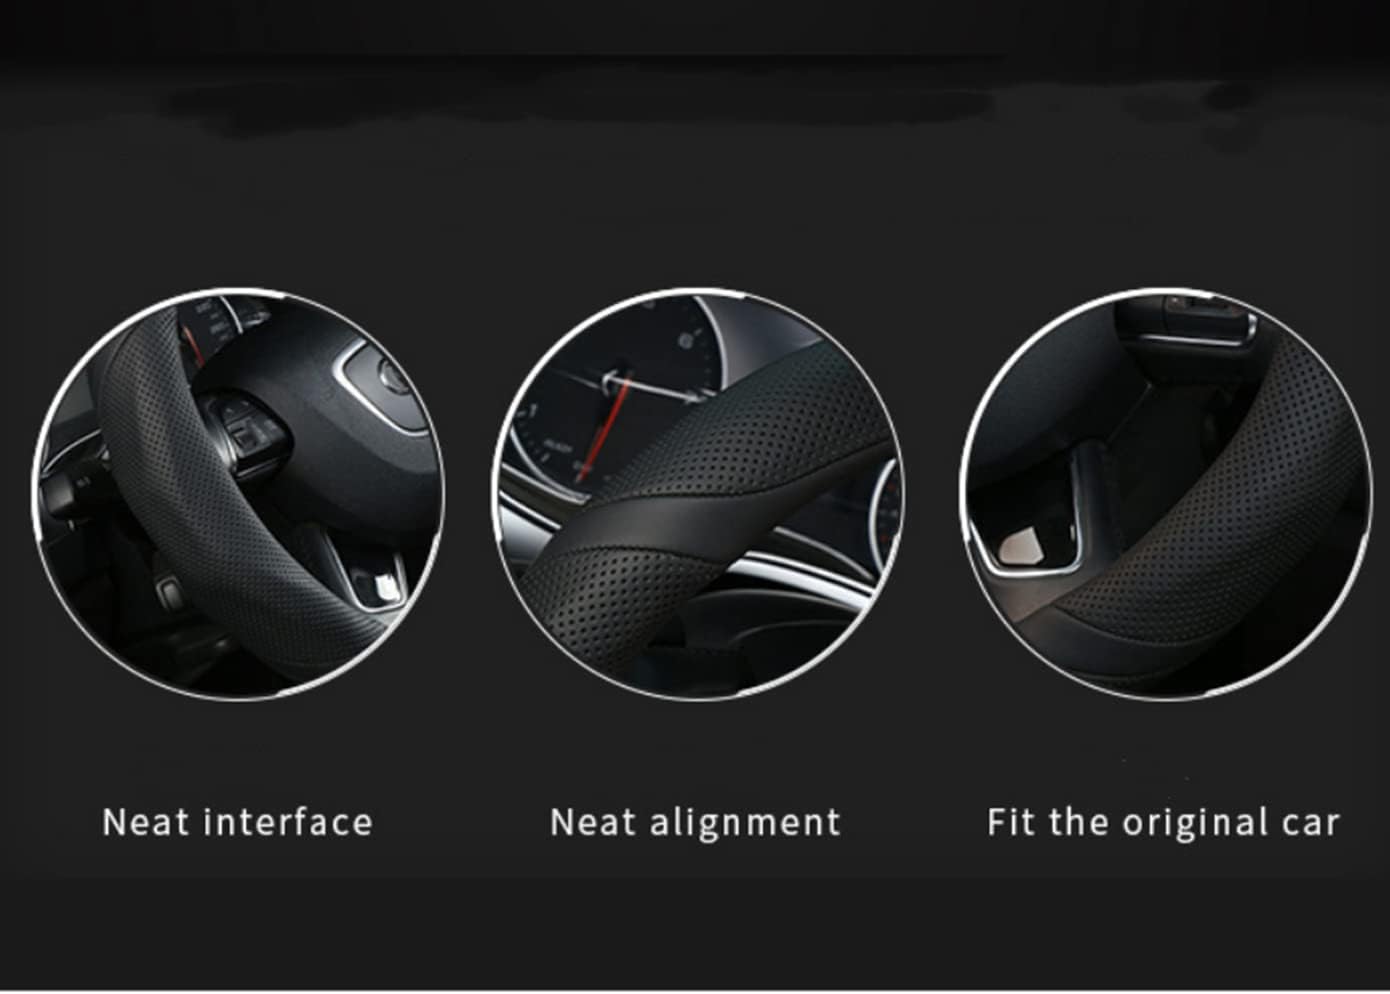 Car Steering Wheel Cover,Microfiber Leather Steering Wheel Cover, Universal 38cm 15 inches,Non-Slip Rubber,Breathable,wear-resistan (Black)